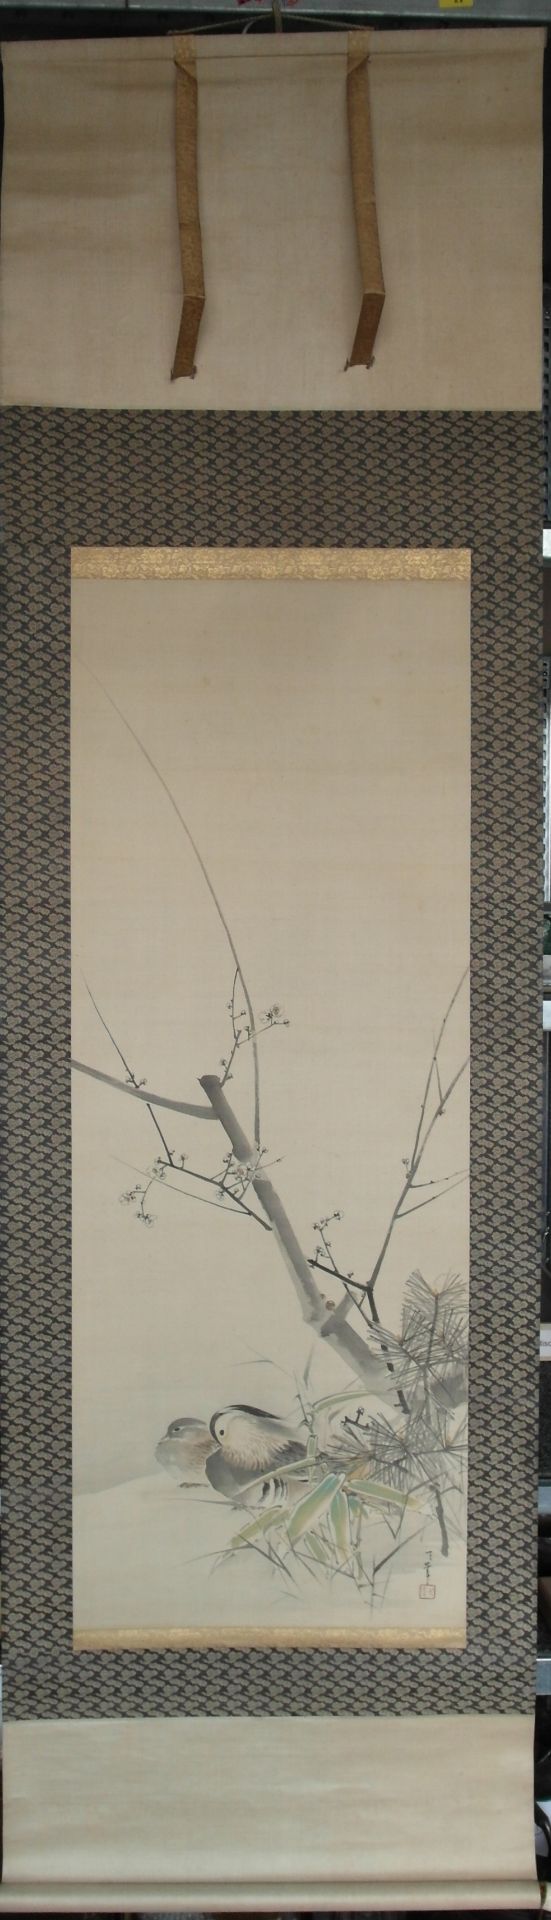 FOUR HANGING SCROLLS. Japan. 19th/20th c. Ink and colors on paper resp. silk. a) Butterflies. 109. - Bild 5 aus 5